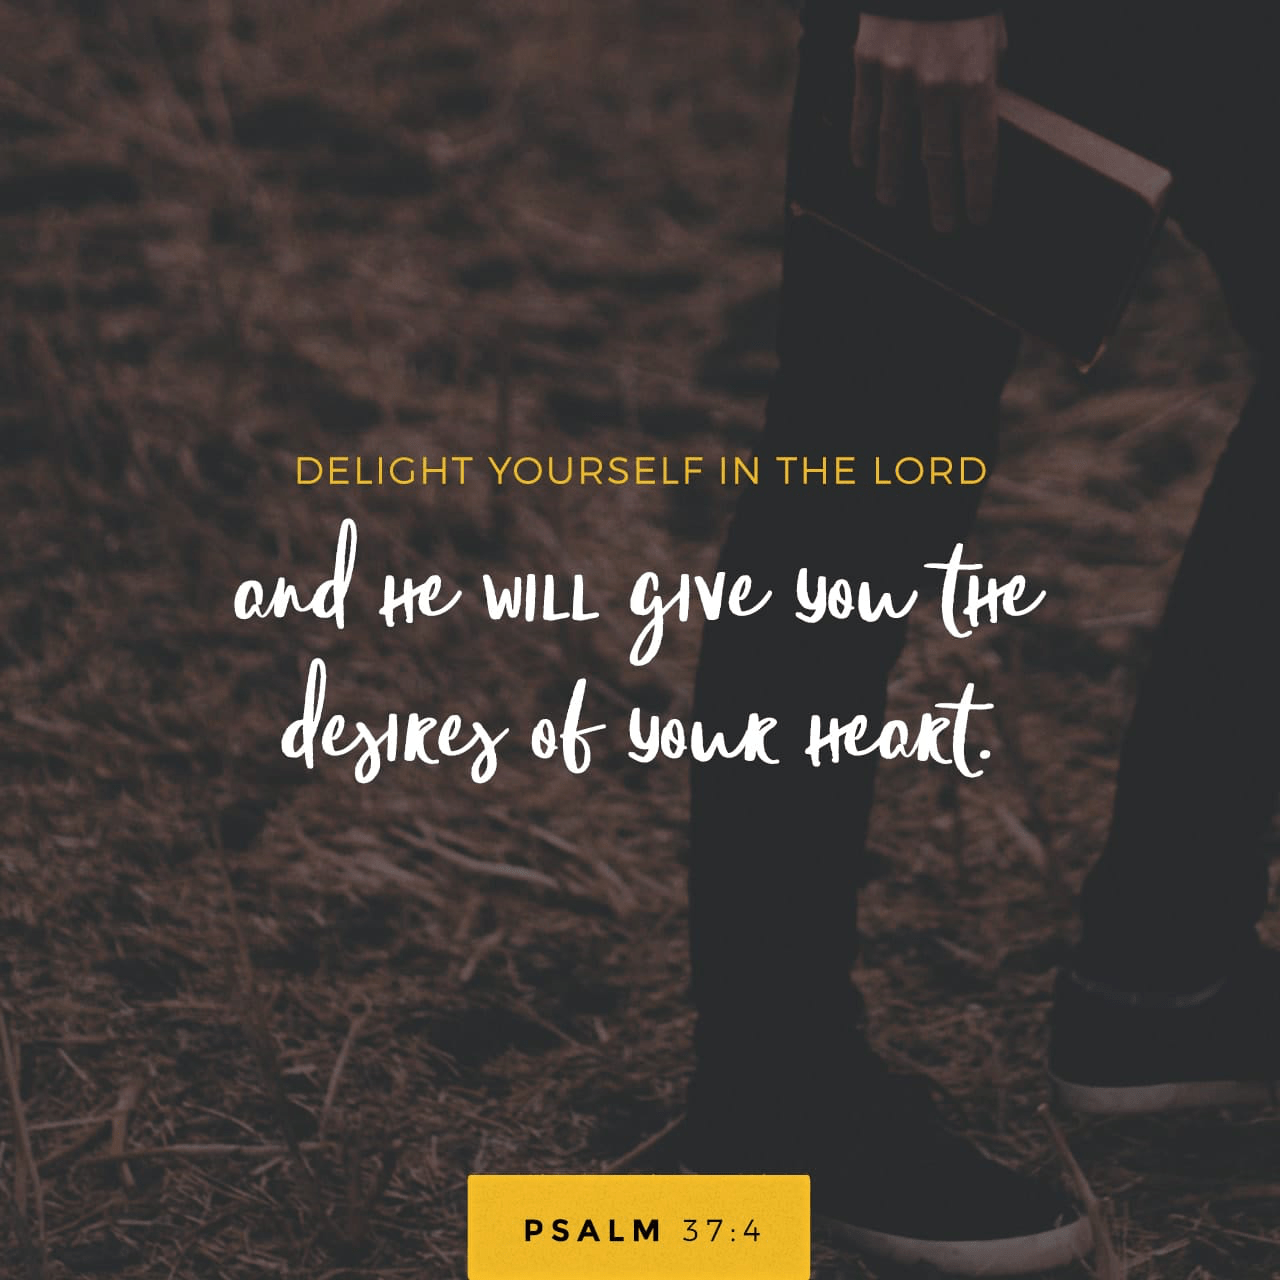 VOTD March 11 - “Delight yourself in the LORD; And He will give you the desires of your heart.” ‭‭Psalms‬ ‭37:4‬ ‭NASB‬‬